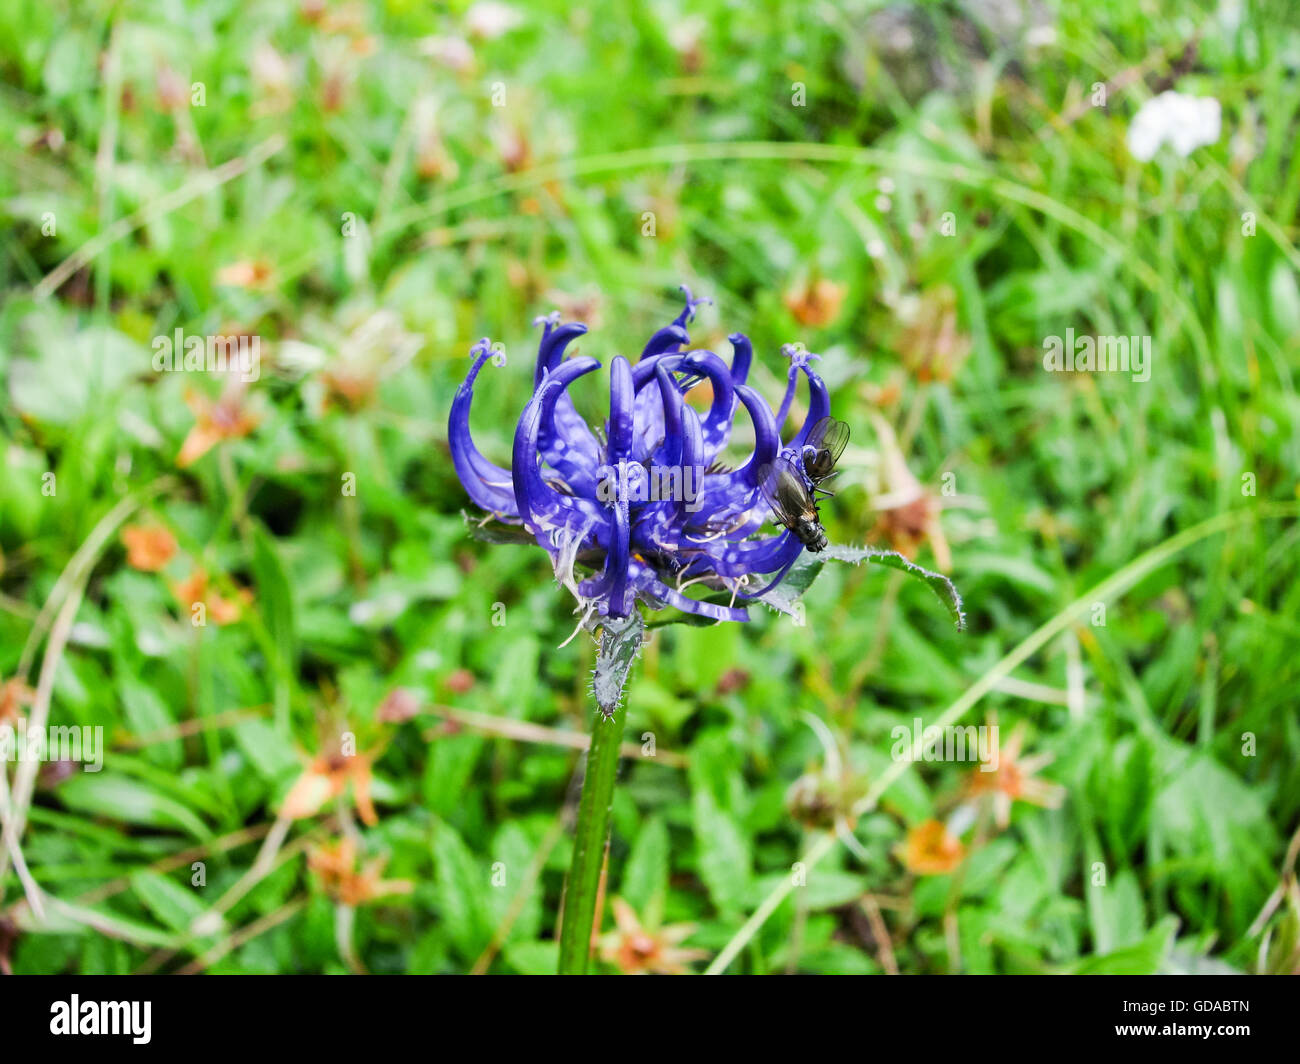 Italy, Trentino-Alto Adige, Sextener Dolomites, multi-day hike, purple flower in a meadow, spherical devil's claw on the way to Forcella Popera Stock Photo